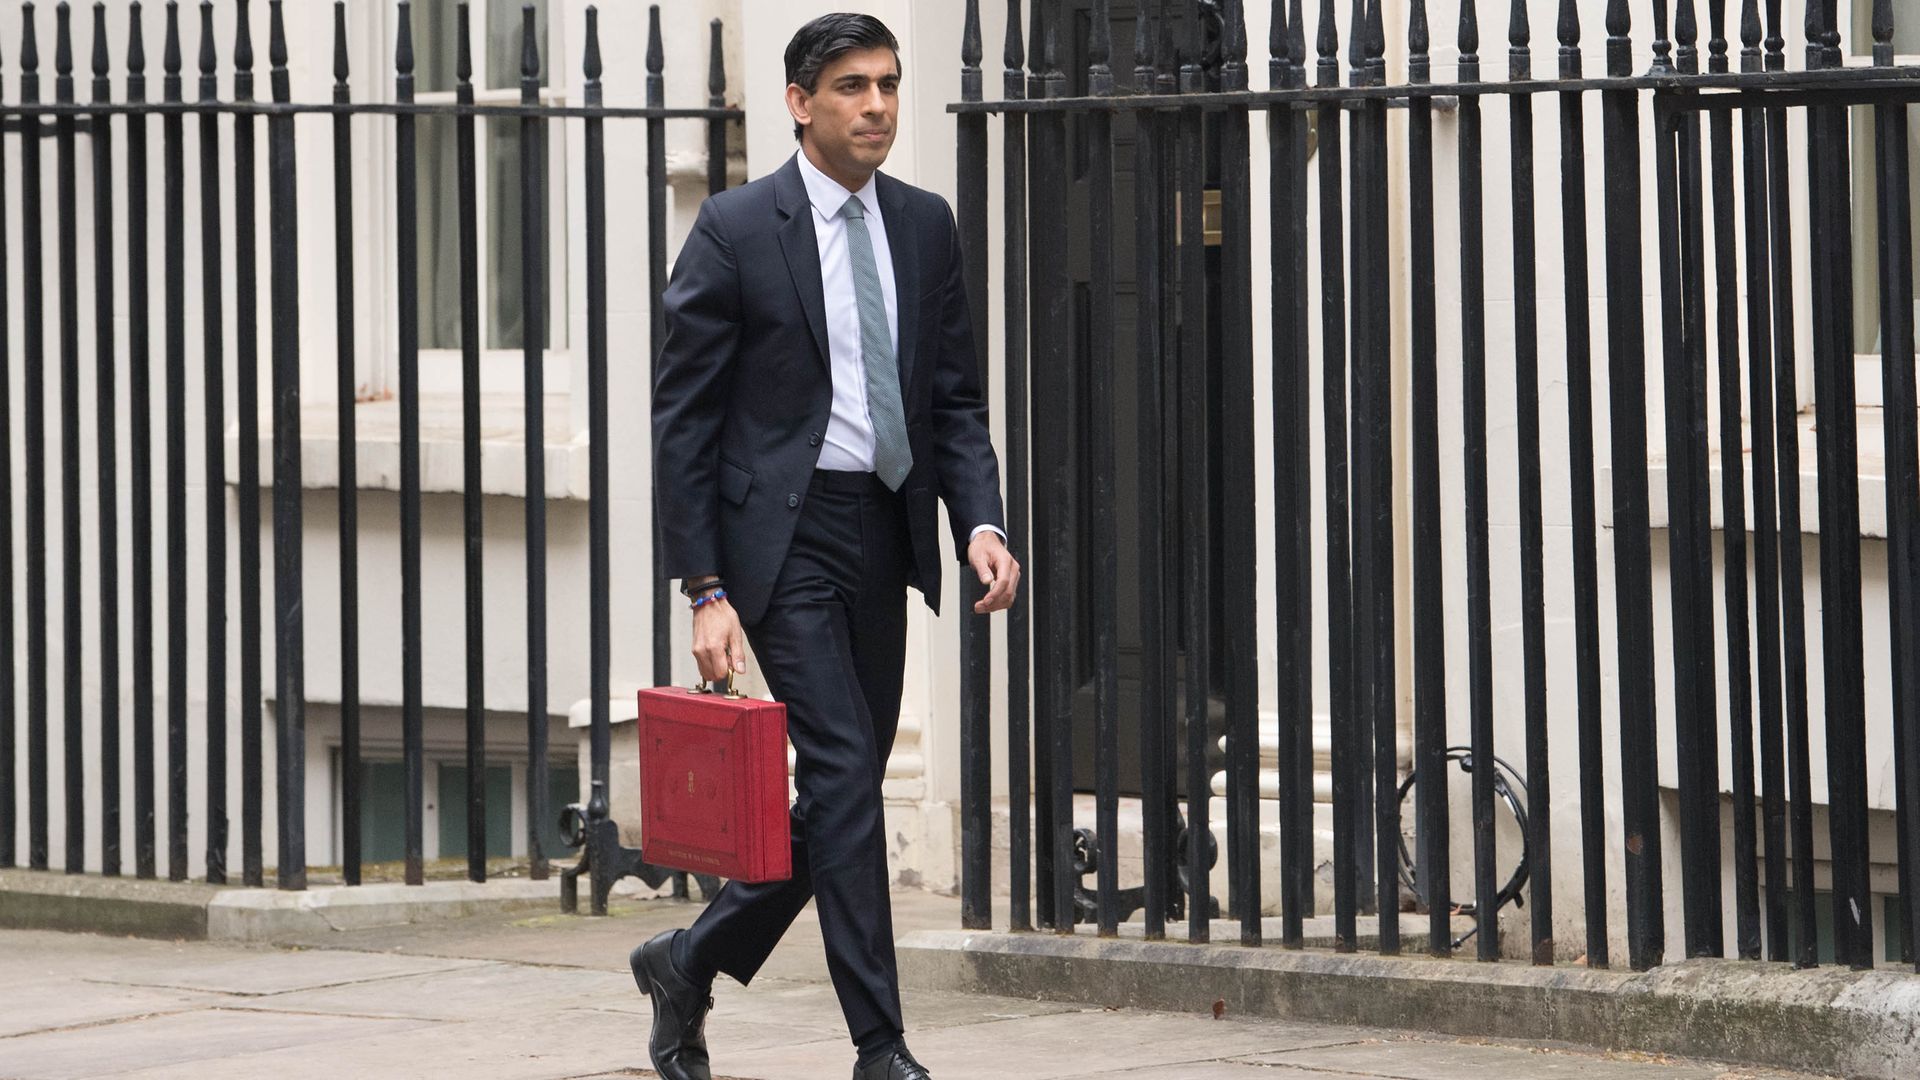 Chancellor of the Exchequer, Rishi Sunak outside 11 Downing Street, London - Credit: PA